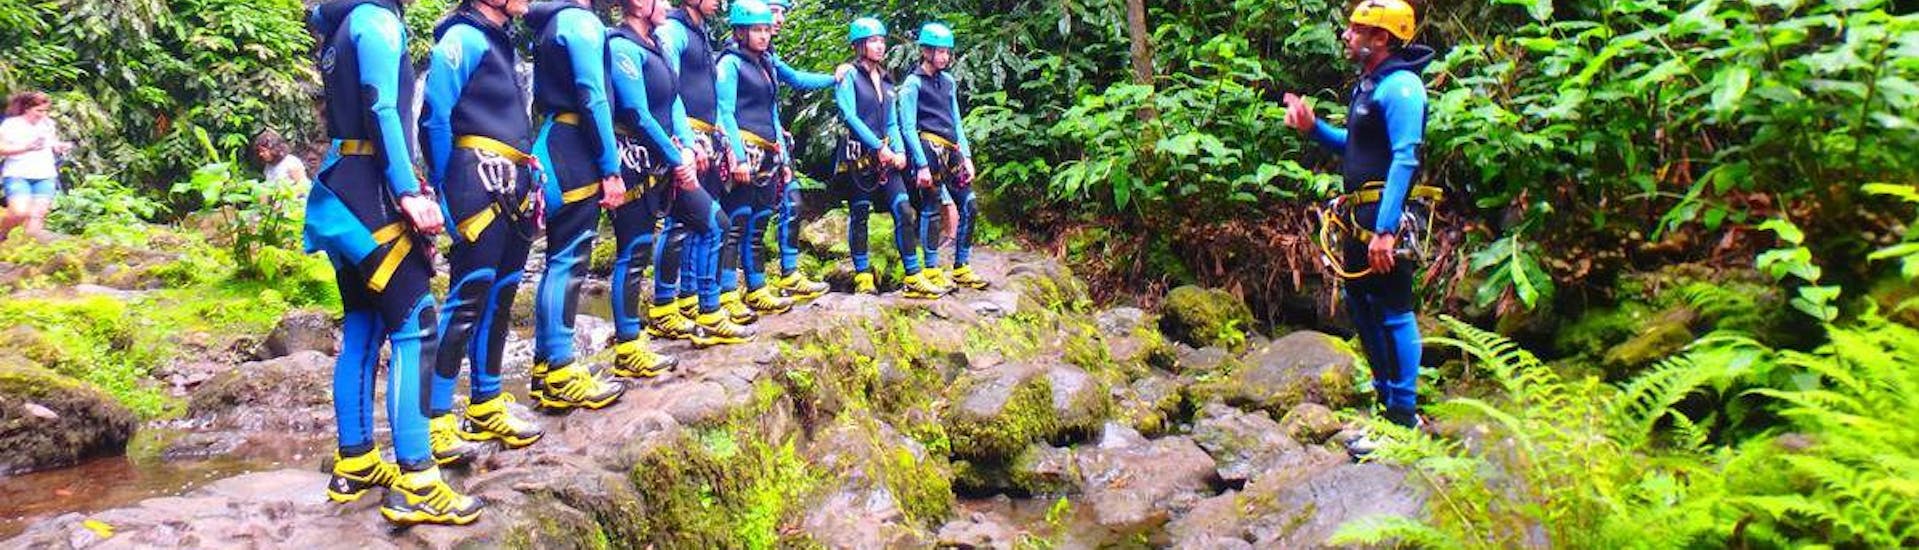 Our guide is explaining the go-to rules and behaviors for the Canyoning in Ribeira dos Caldeirões with Lunch - Full Day.